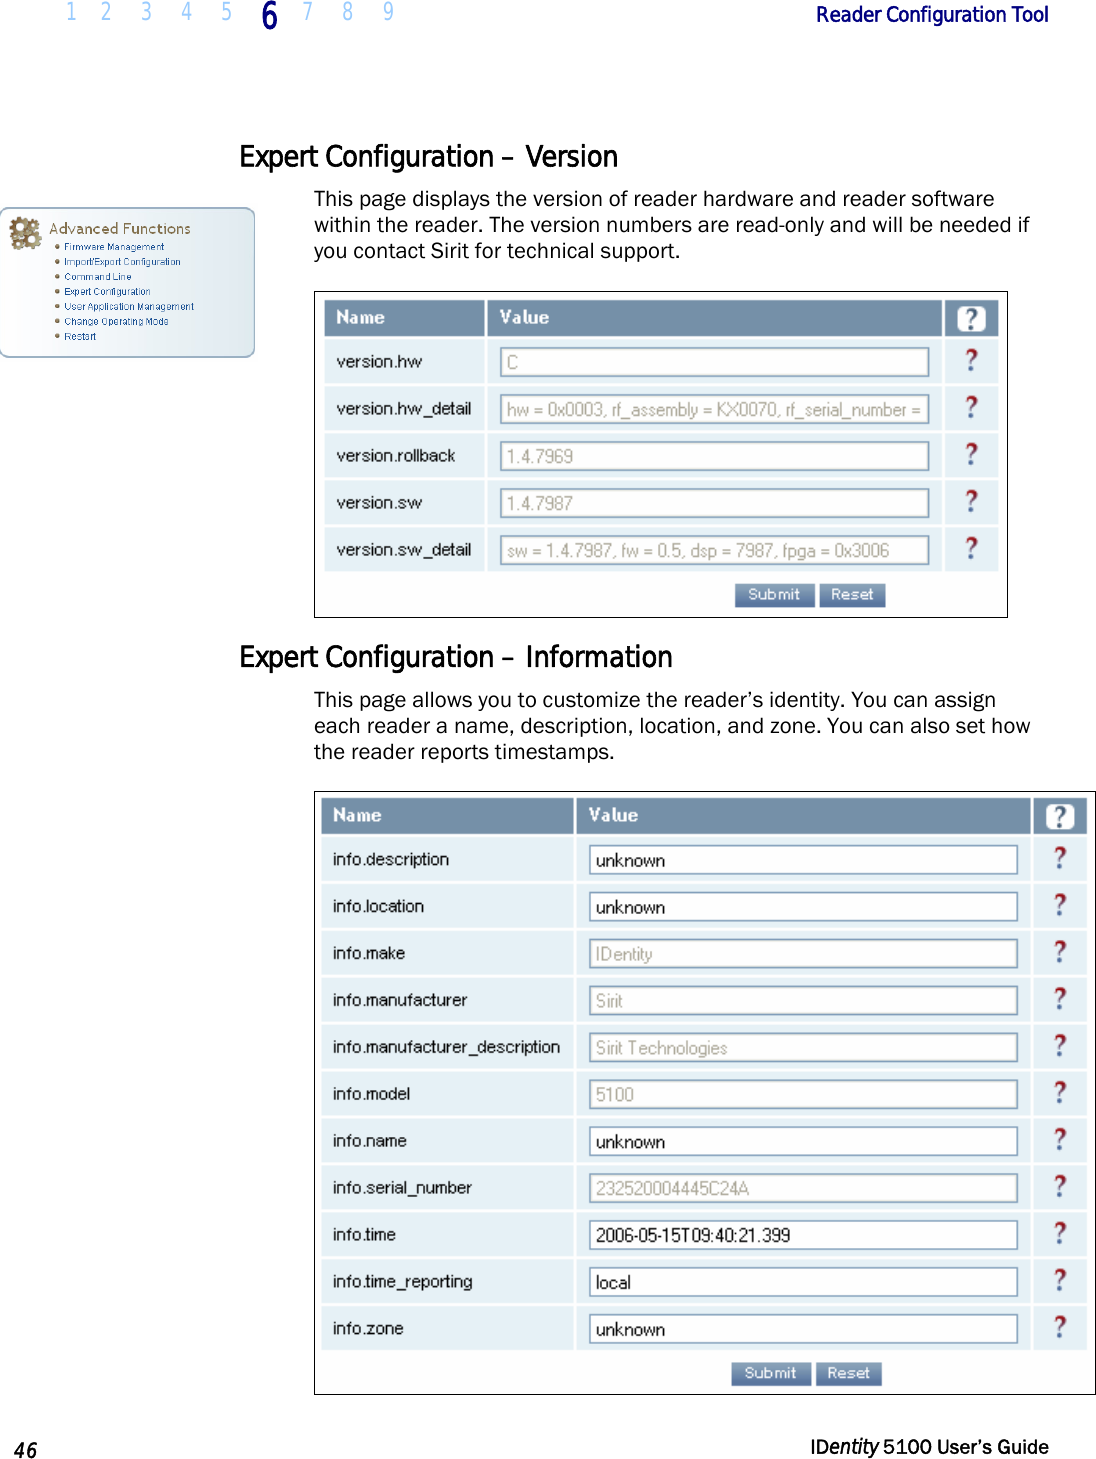  1 2  3  4  5 6 7 8 9       Reader Configuration Tool   46  IDentity 5100 User’s Guide  Expert Configuration – Version This page displays the version of reader hardware and reader software within the reader. The version numbers are read-only and will be needed if you contact Sirit for technical support.  Expert Configuration – Information This page allows you to customize the reader’s identity. You can assign each reader a name, description, location, and zone. You can also set how the reader reports timestamps.   